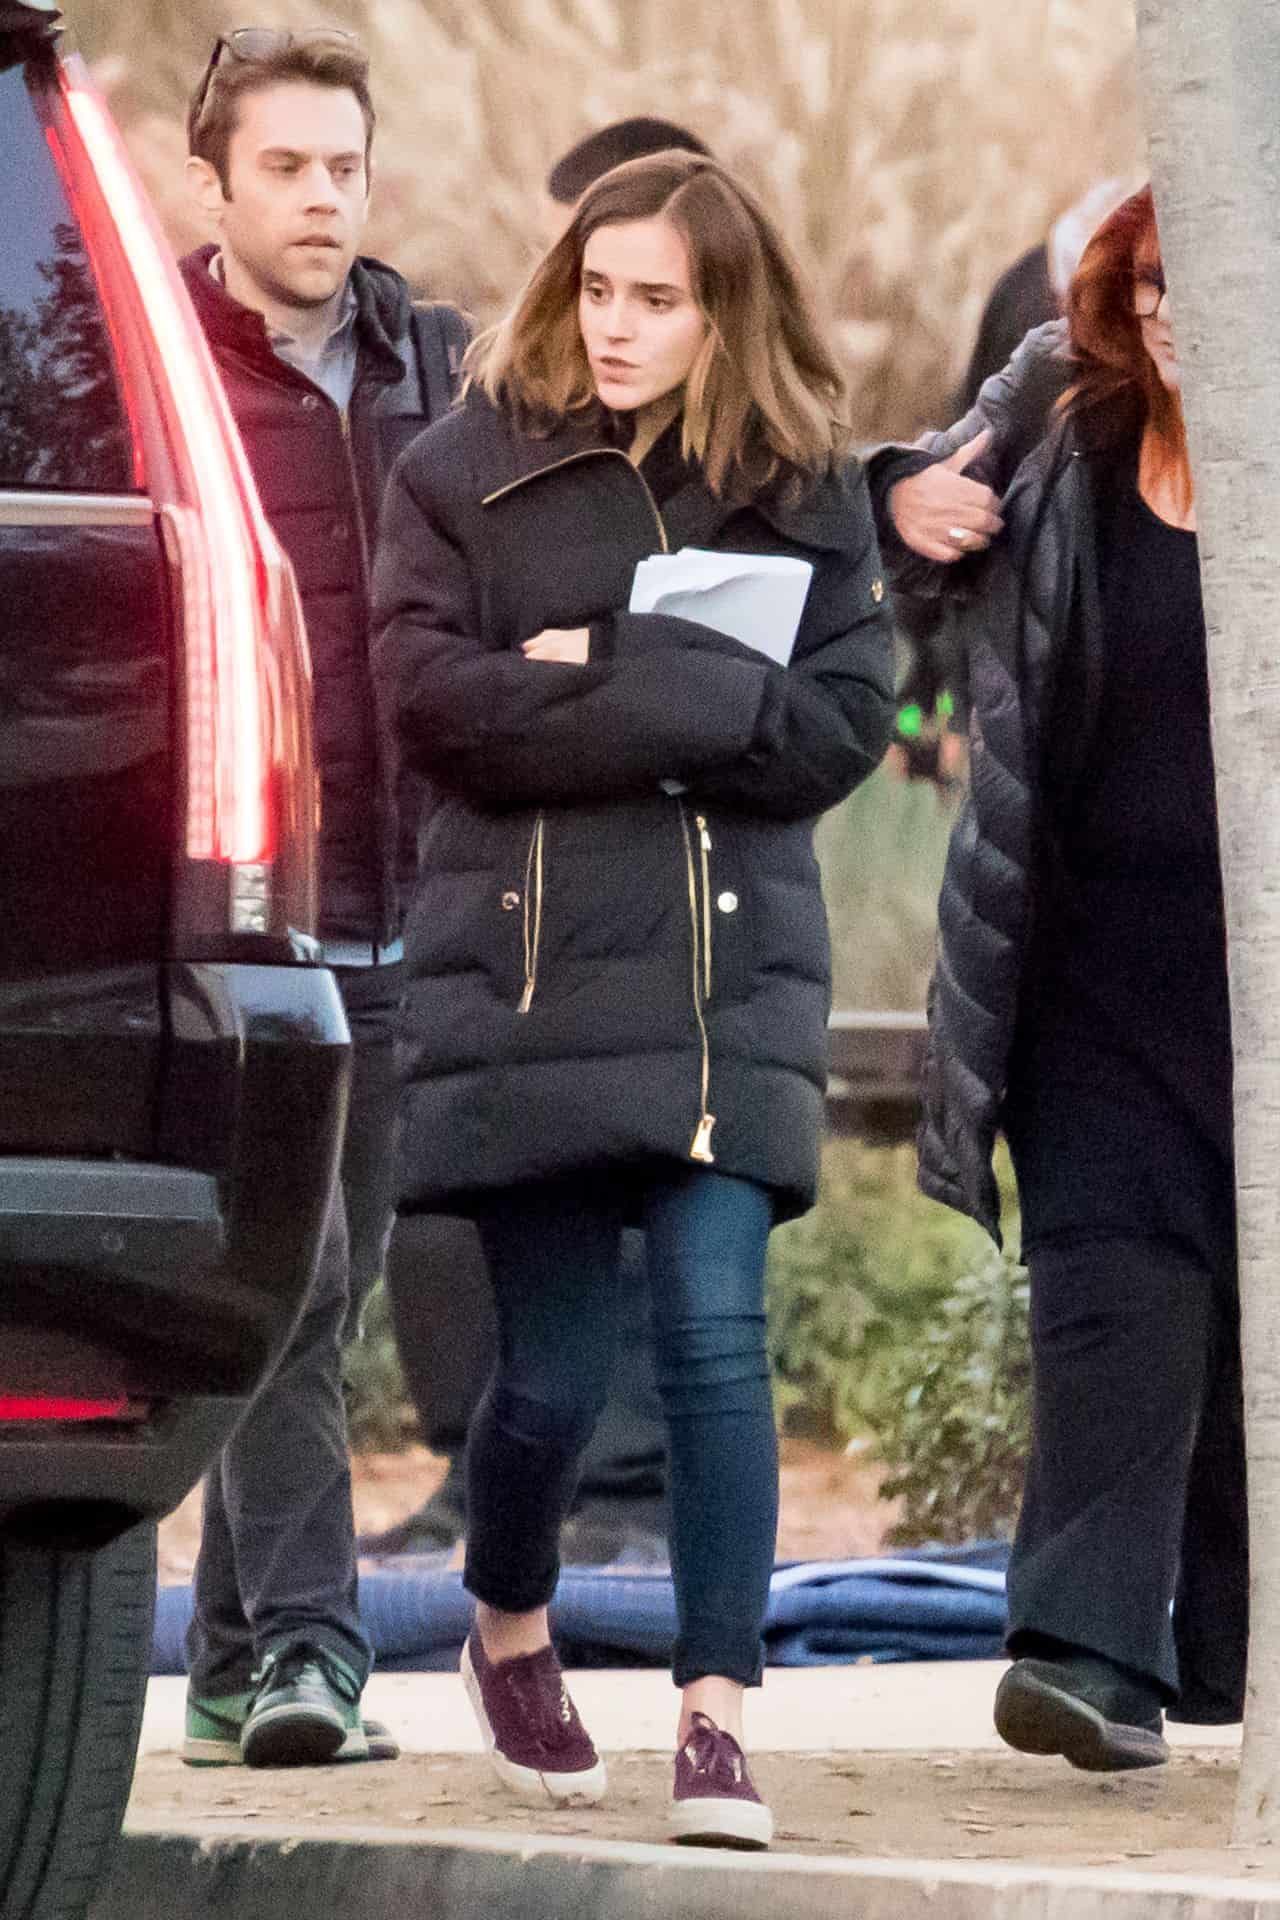 Emma Watson Stuns in a Blue Sweater and Jeans on the Set of “The Circle”